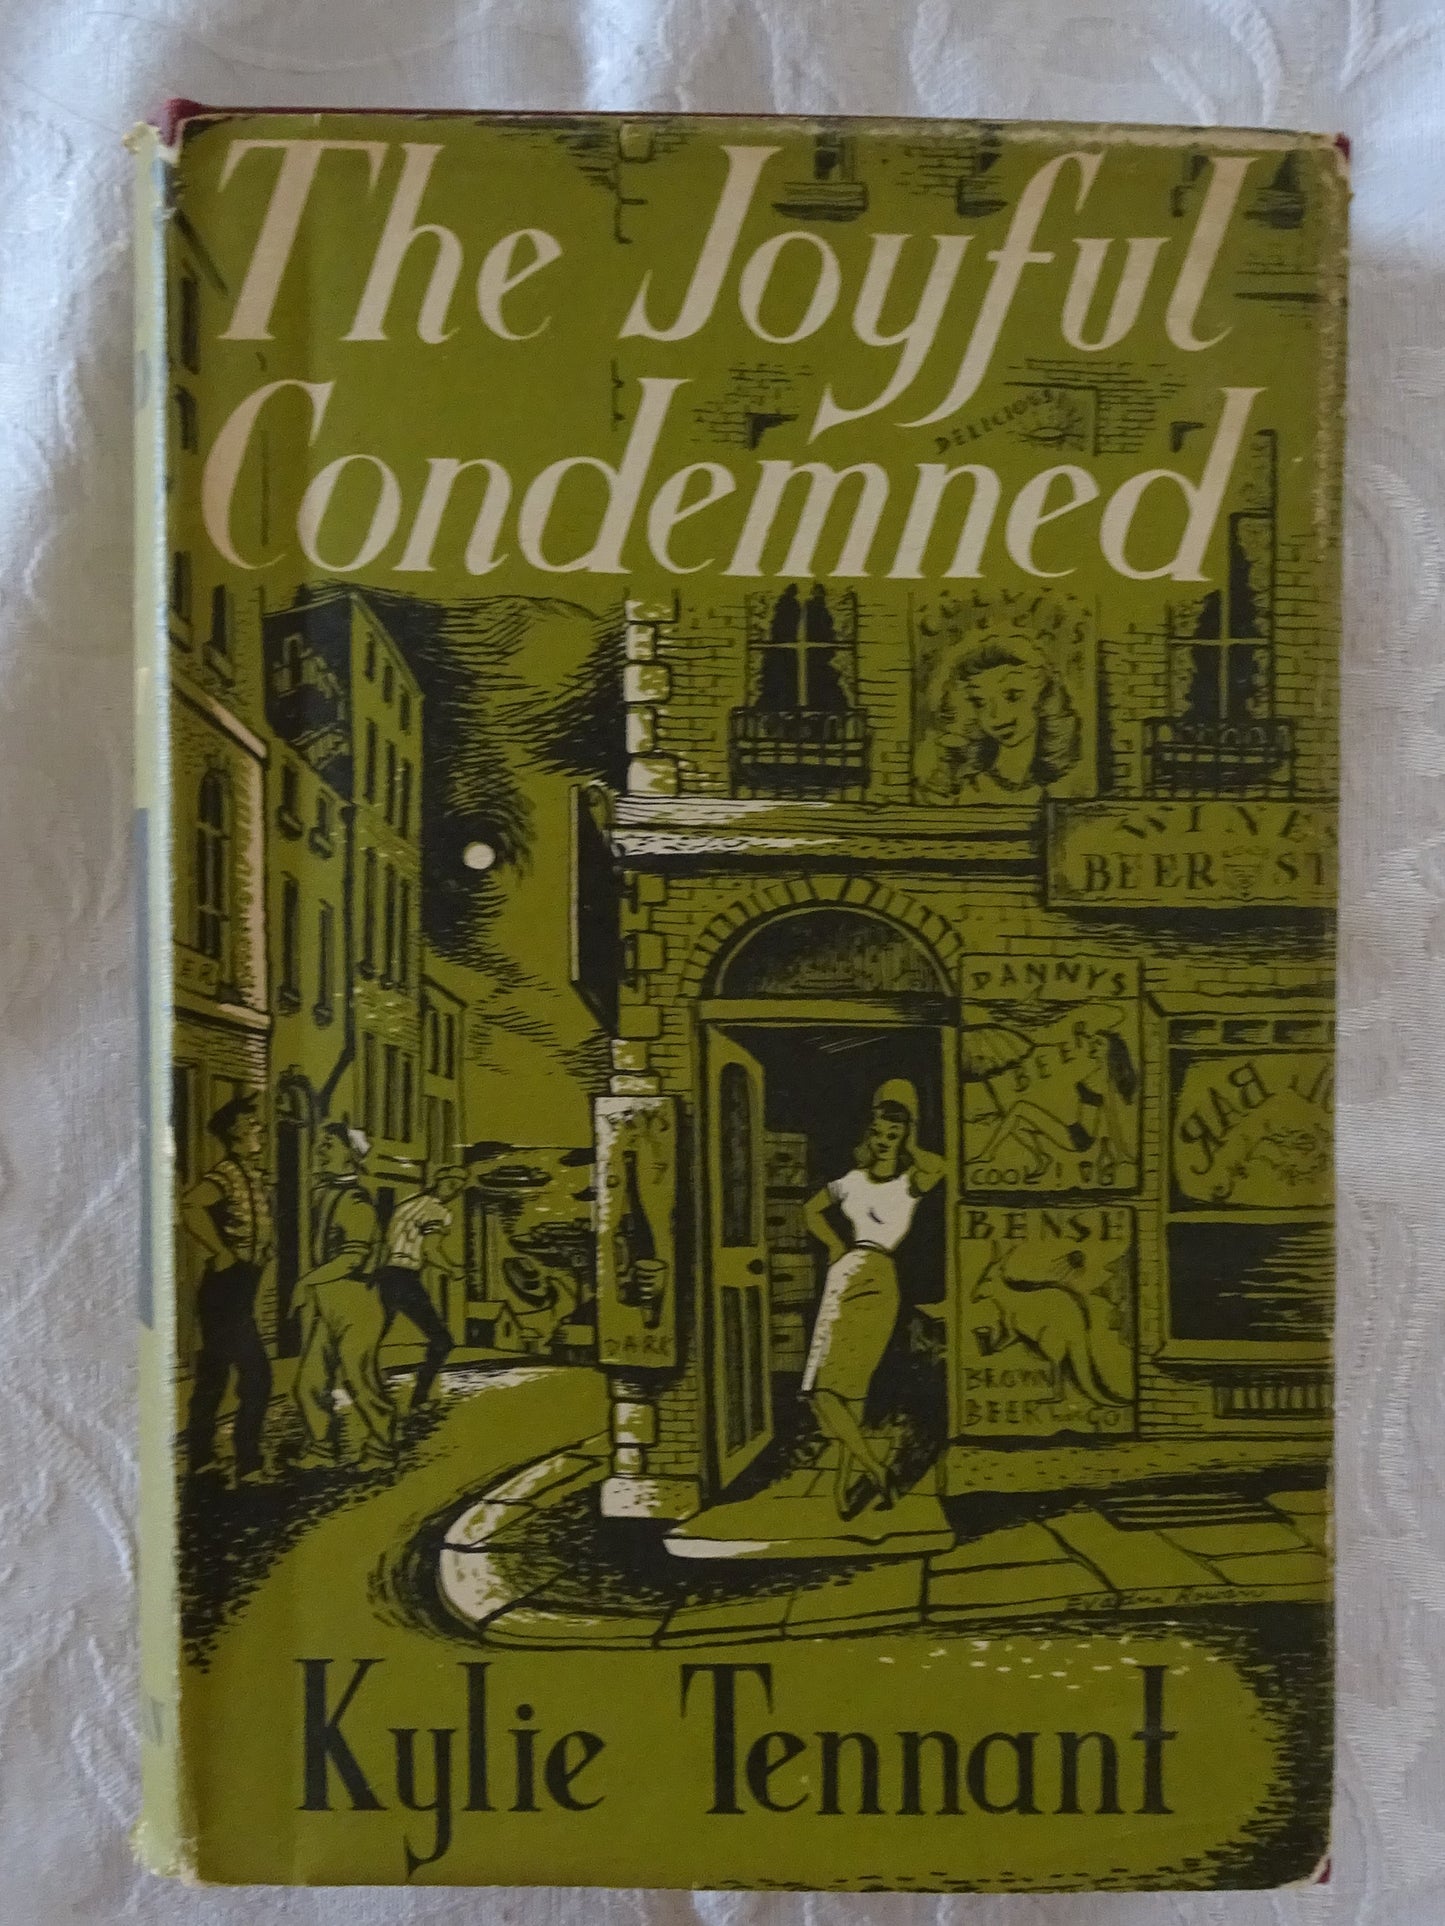 The Joyful Condemned by Kylie Tennant